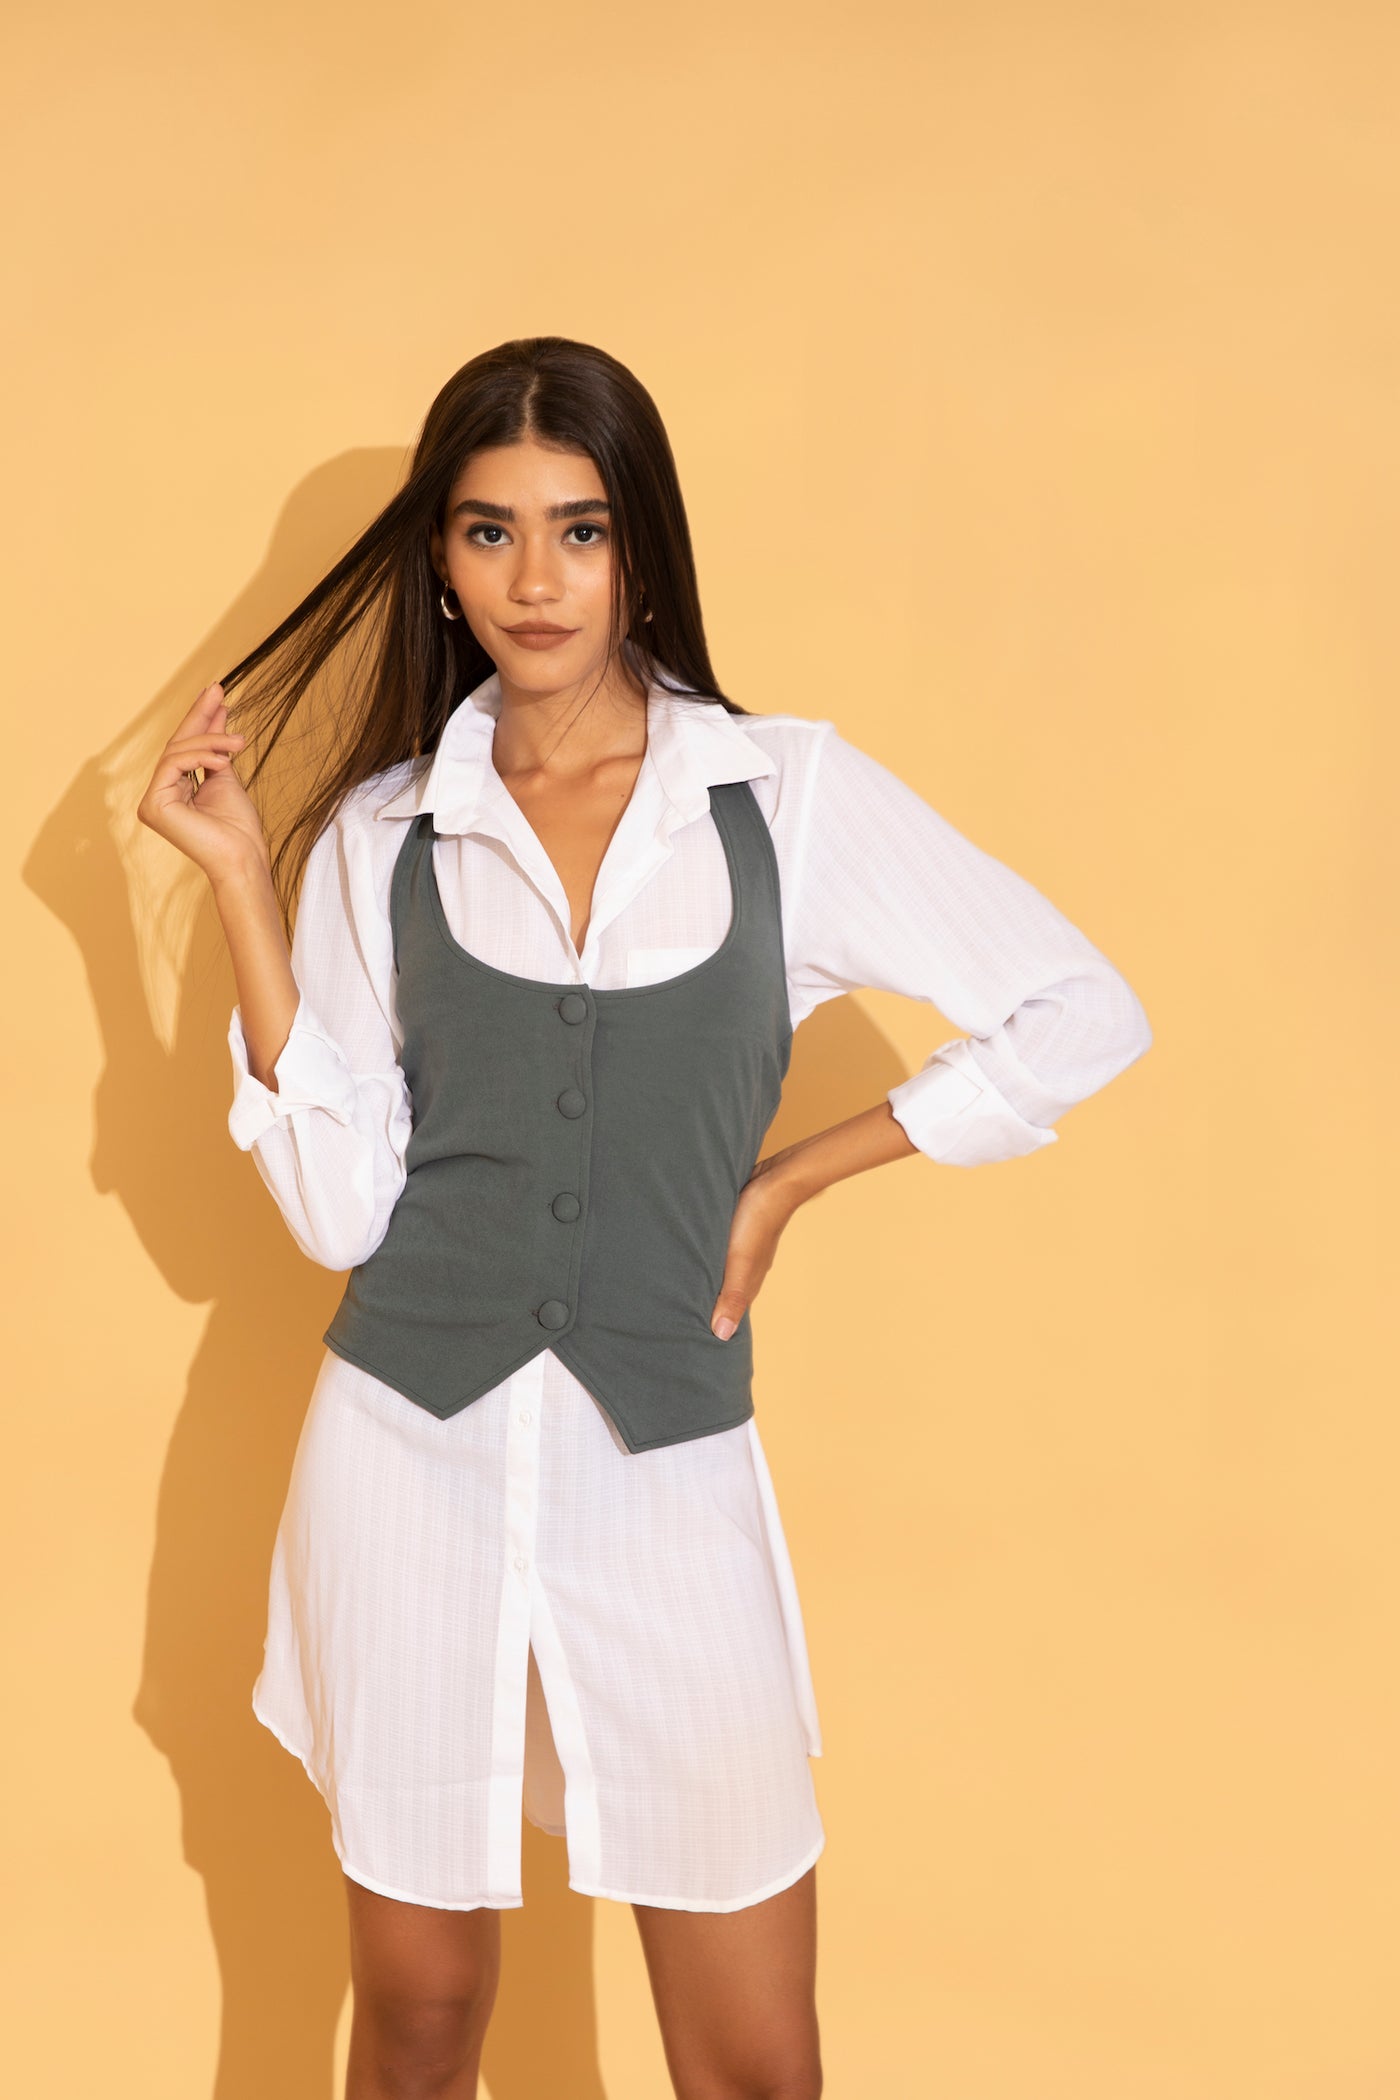 Multi-purpose soft fabric waistcoat from Torqadorn styled with white shirt